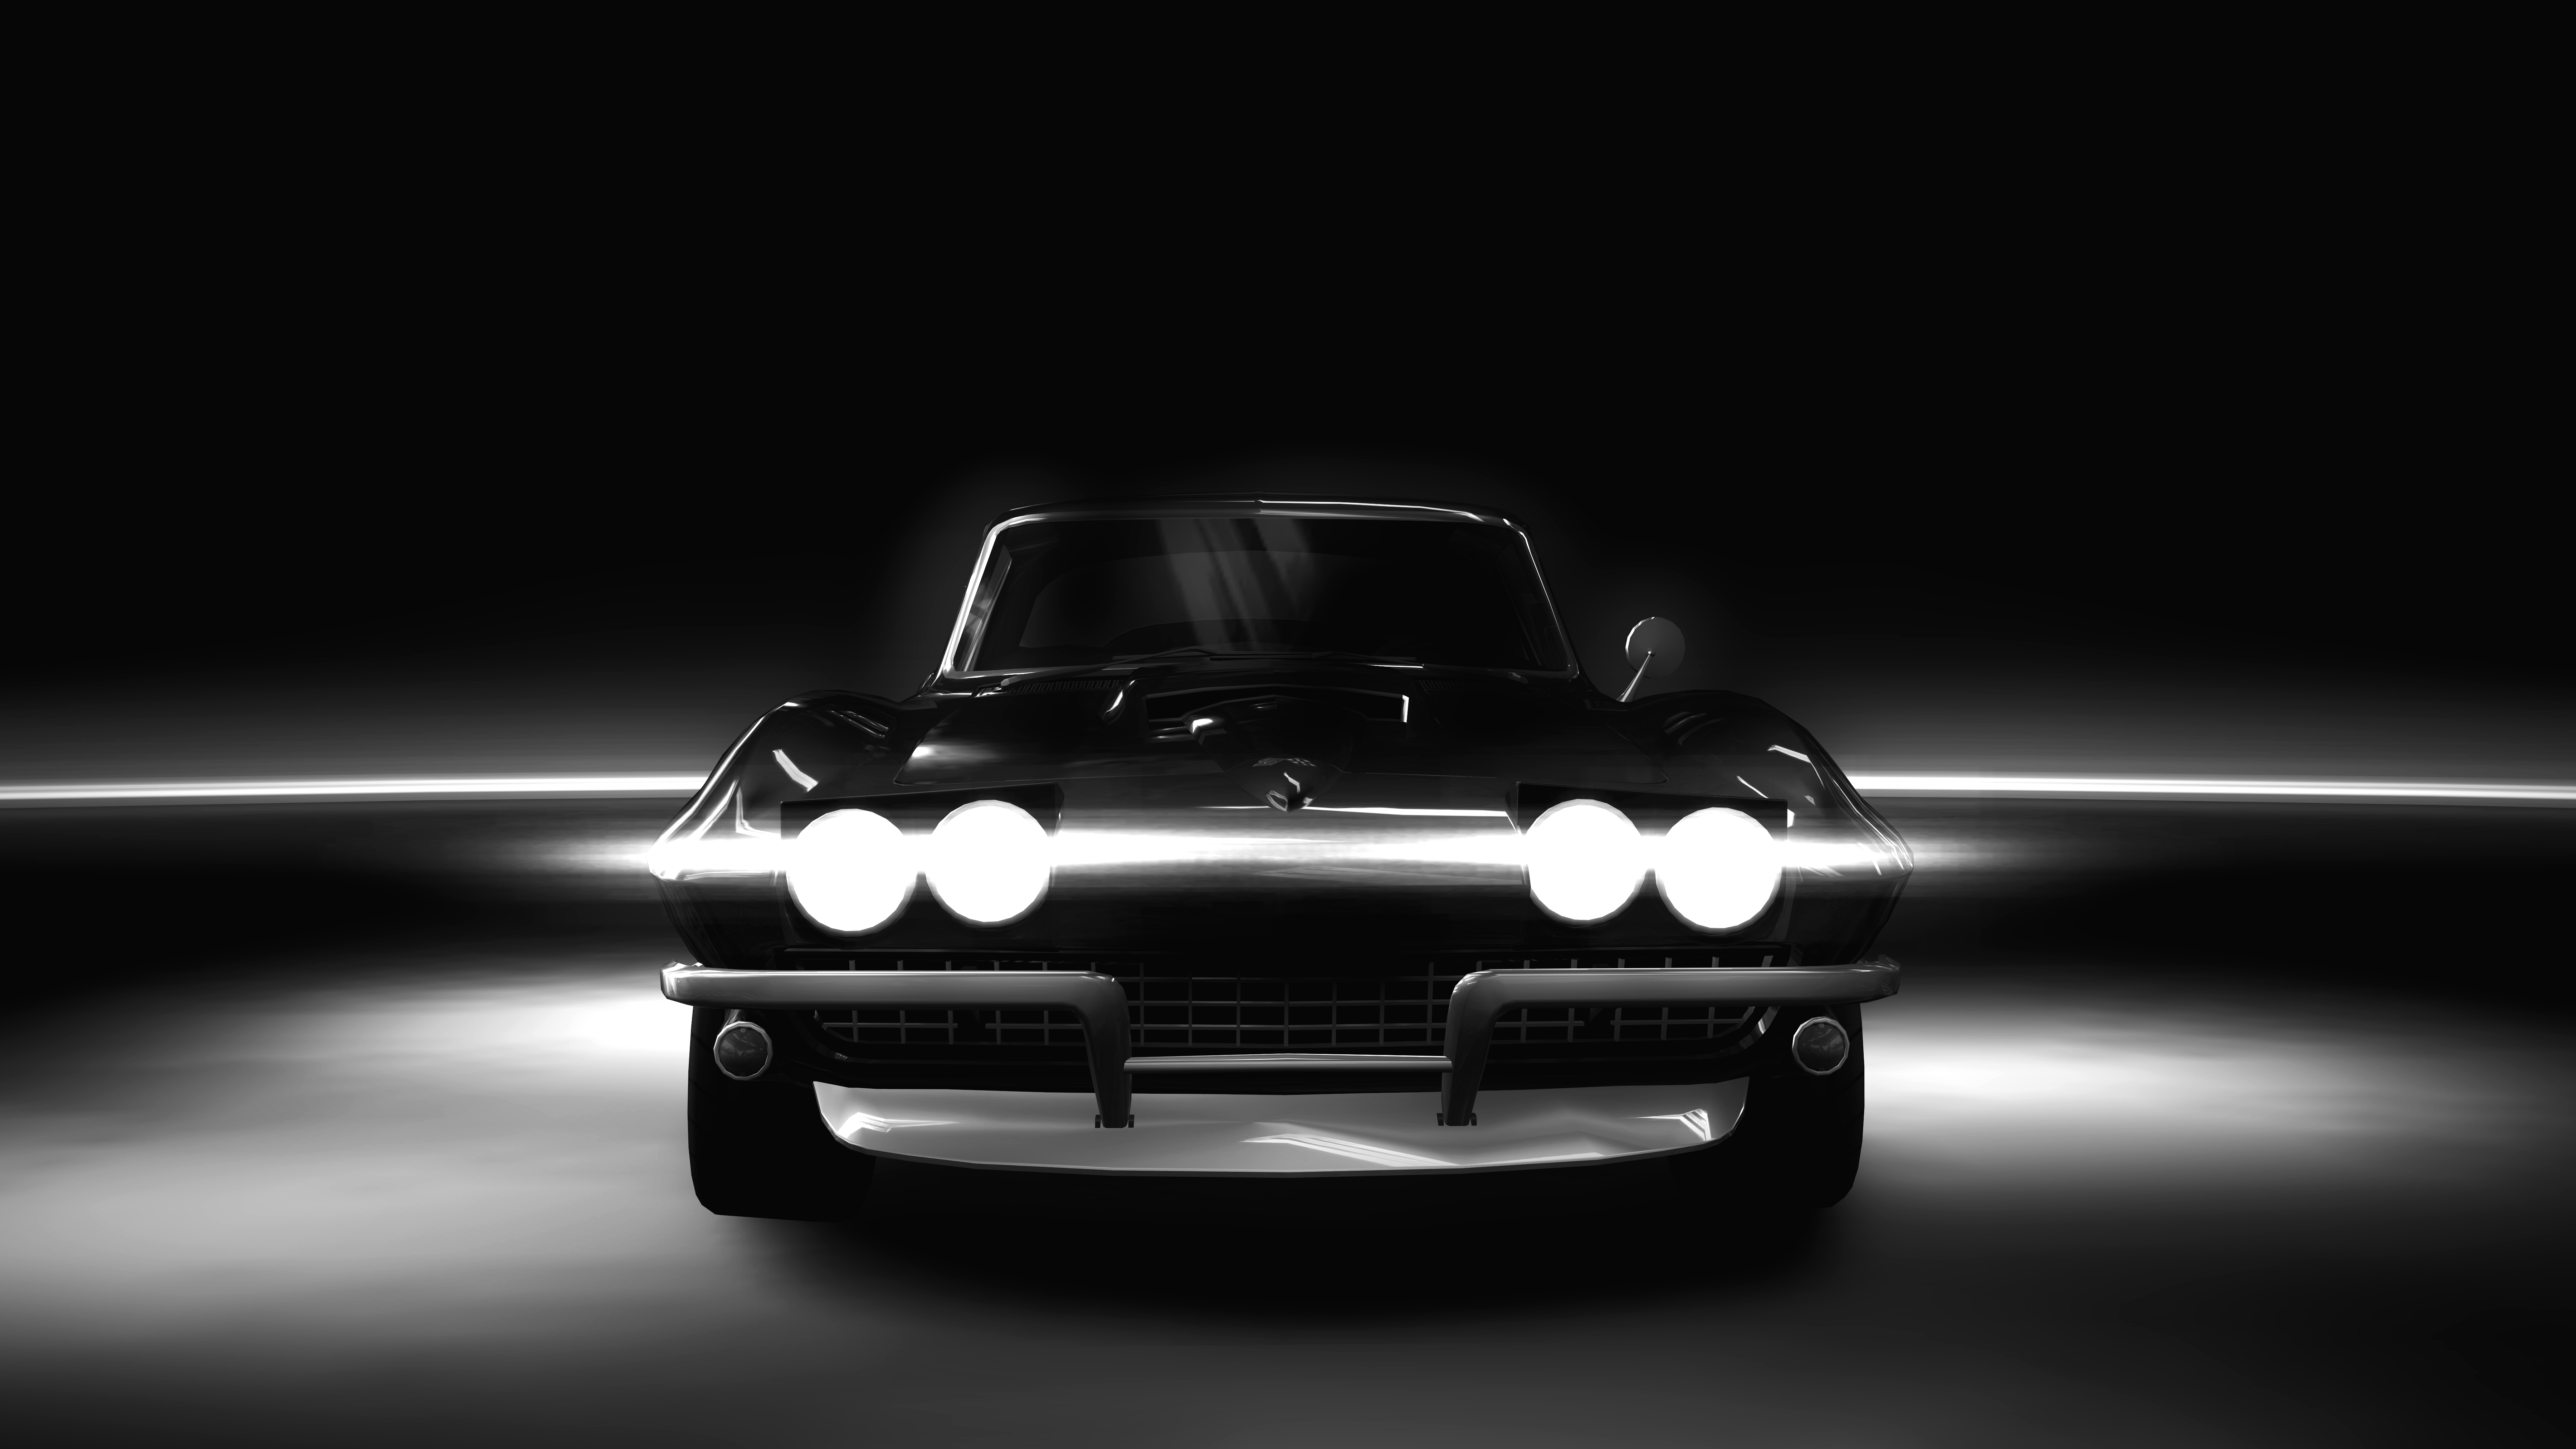 General 7200x4050 Need for Speed Need for Speed: World video games car muscle cars classic car Chevrolet Corvette C2 frontal view headlights pop-up headlights monochrome Corvette simple background minimalism vehicle